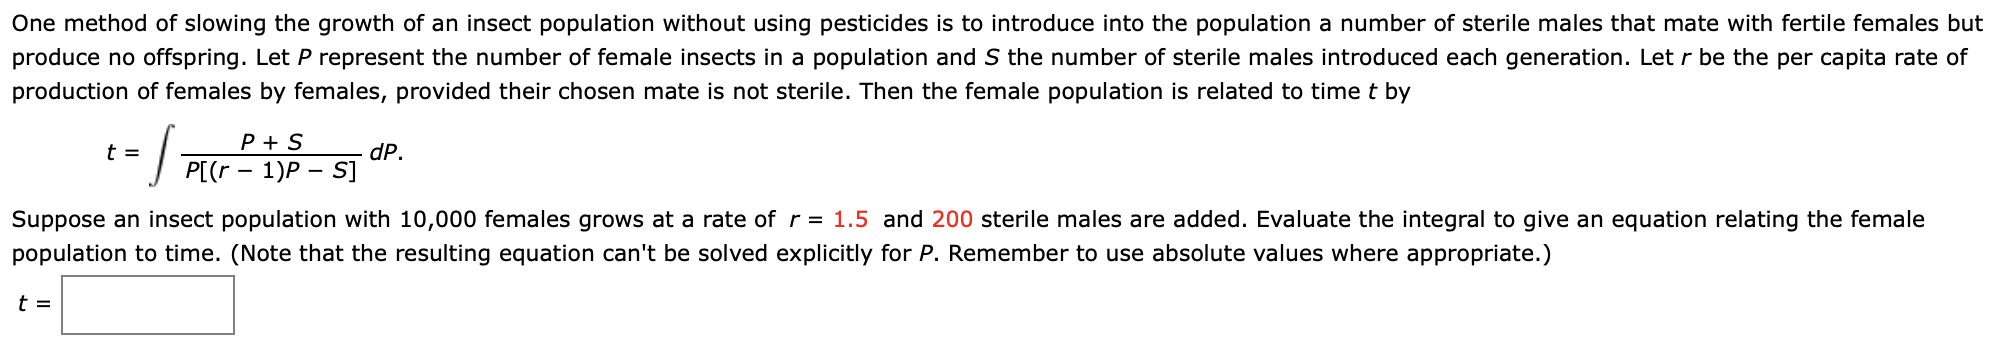 One method of slowing the growth of an insect population without using pesticides is to introduce into the population a number of sterile males that mate with fertile females but
produce no offspring. Let P represent the number of female insects in a population and S the number of sterile males introduced each generation. Let r be the per capita rate of
production of females by females, provided their chosen mate is not sterile. Then the female population is related to time t by
--
P + S
t =
dP.
P[(r - 1)P – S]
Suppose an insect population with 10,000 females grows at a rate ofr = 1.5 and 200 sterile males are added. Evaluate the integral to give an equation relating the female
population to time. (Note that the resulting equation can't be solved explicitly for P. Remember to use absolute values where appropriate.)
t =
